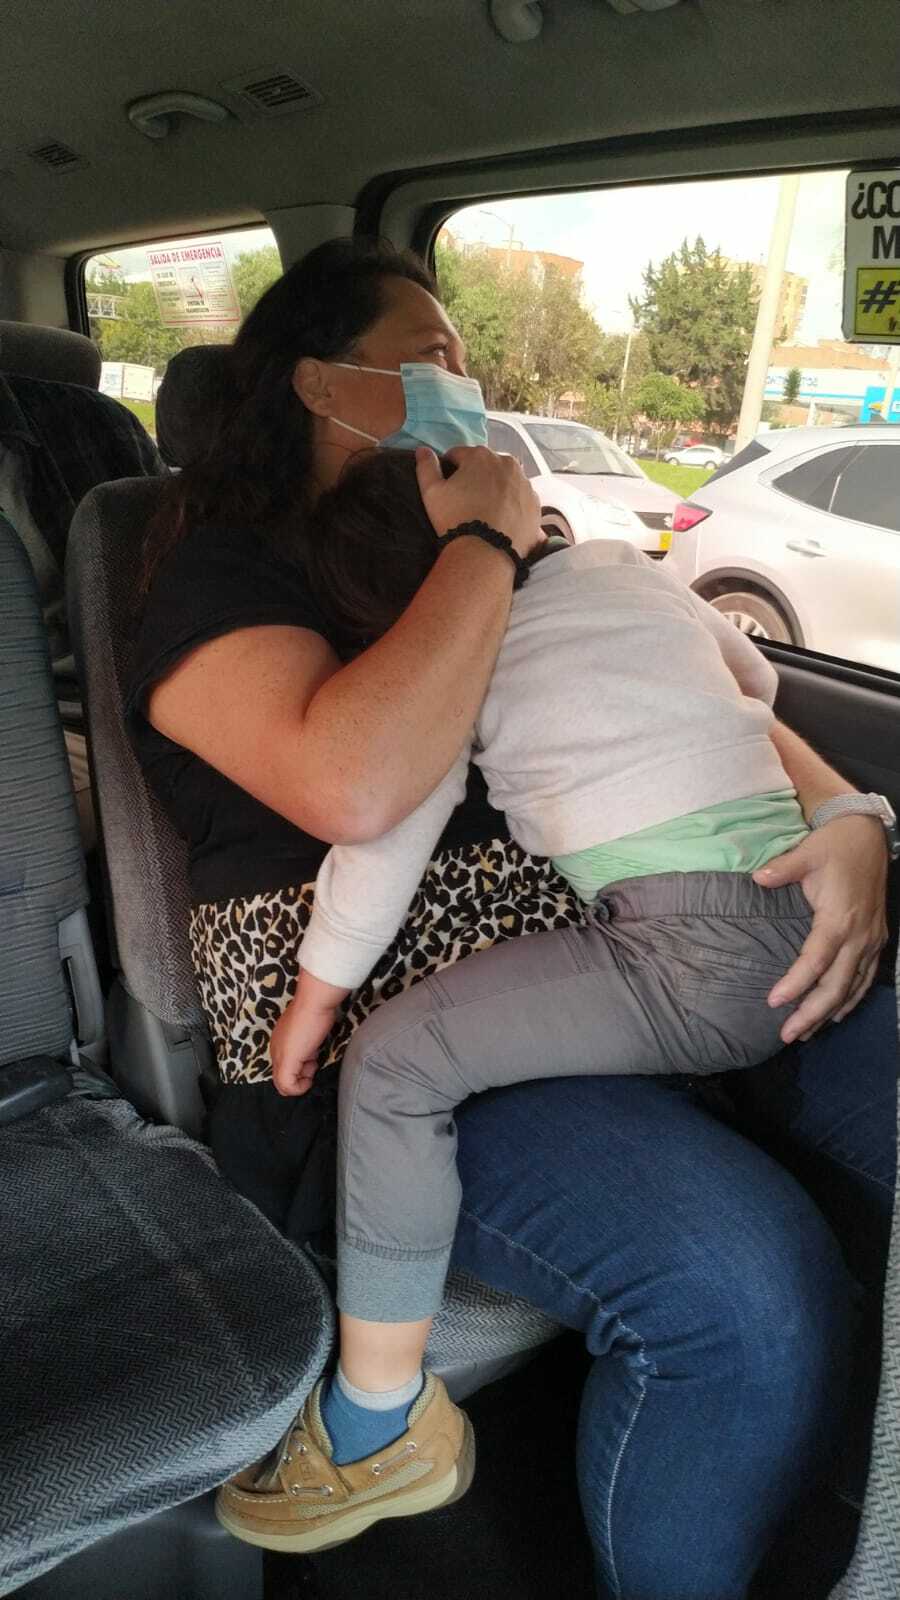 Newly adopted toddler falls asleep on mom's lap as they travel home to the United States.